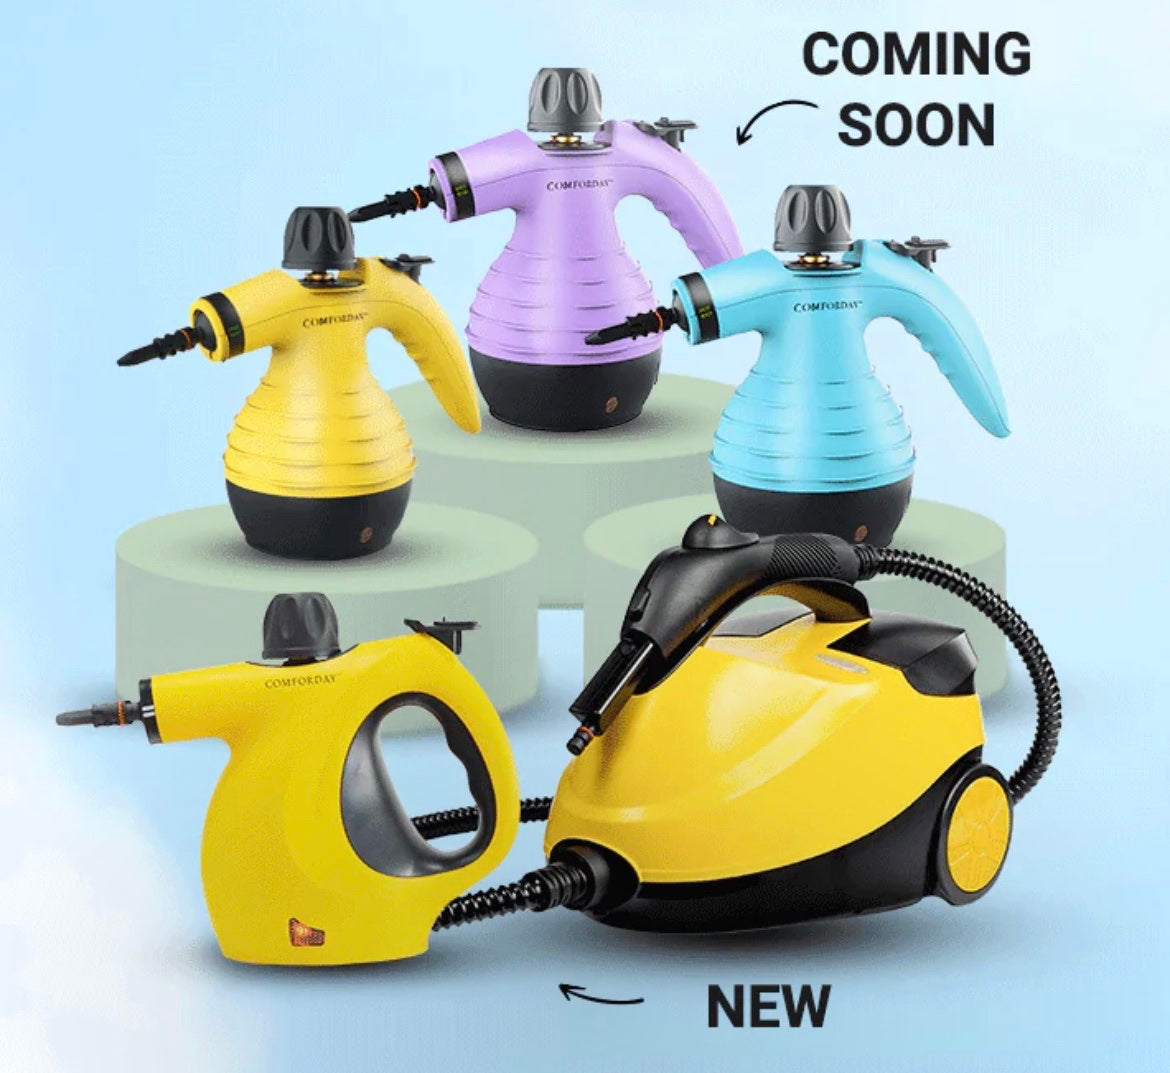 Introducing the Future of Cleanliness: The New Line of Steam Cleaners